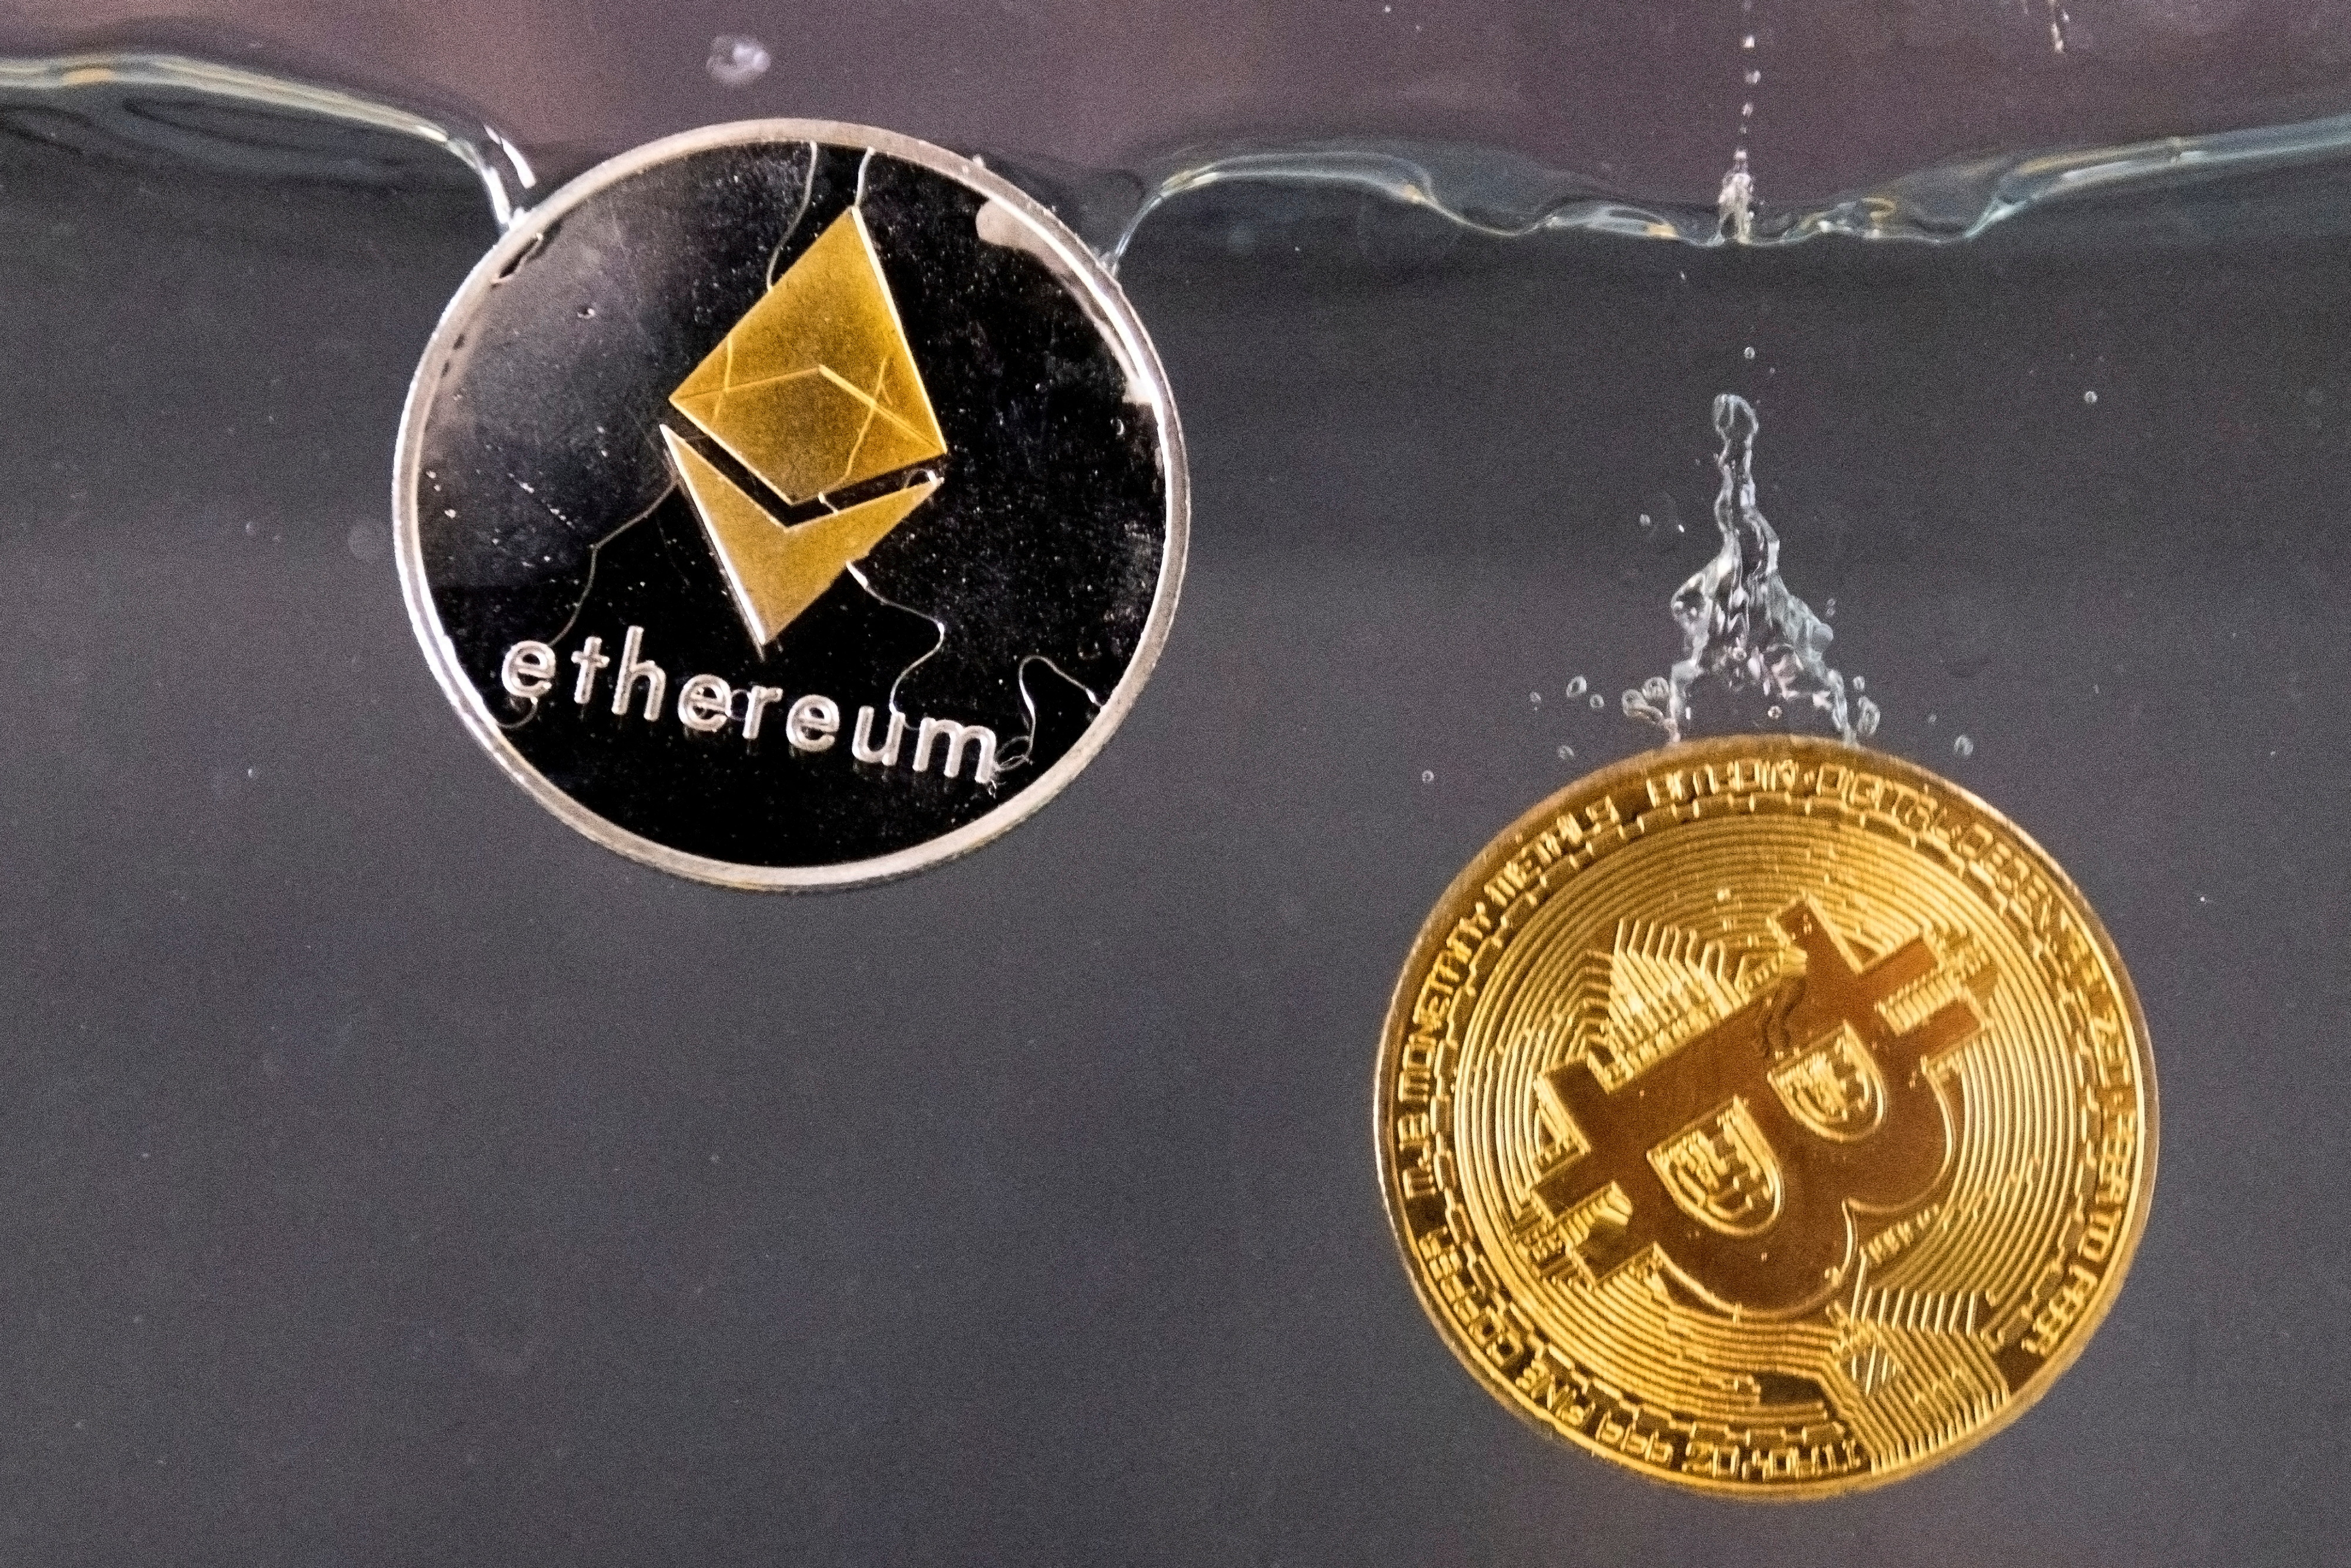 Bitcoin and ether tokens plunge into water